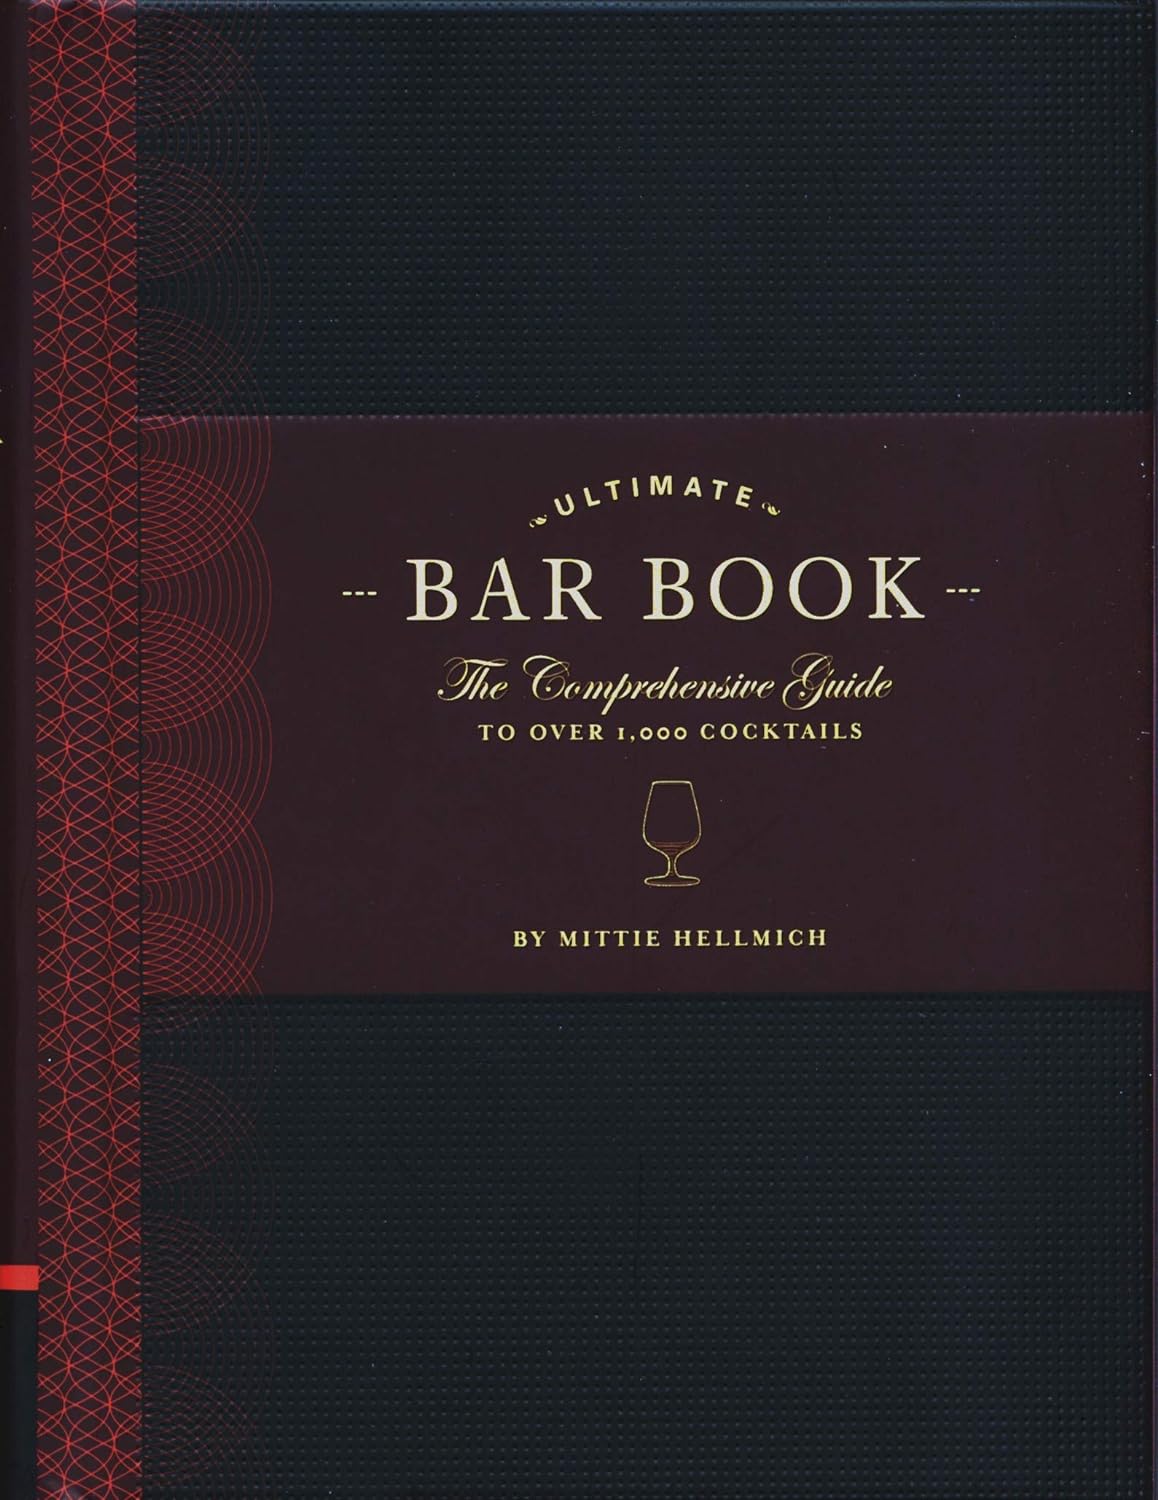 The Ultimate Bar Book: The Comprehensive Guide to Over 1,000 Cocktails (Mittie Hellmich)